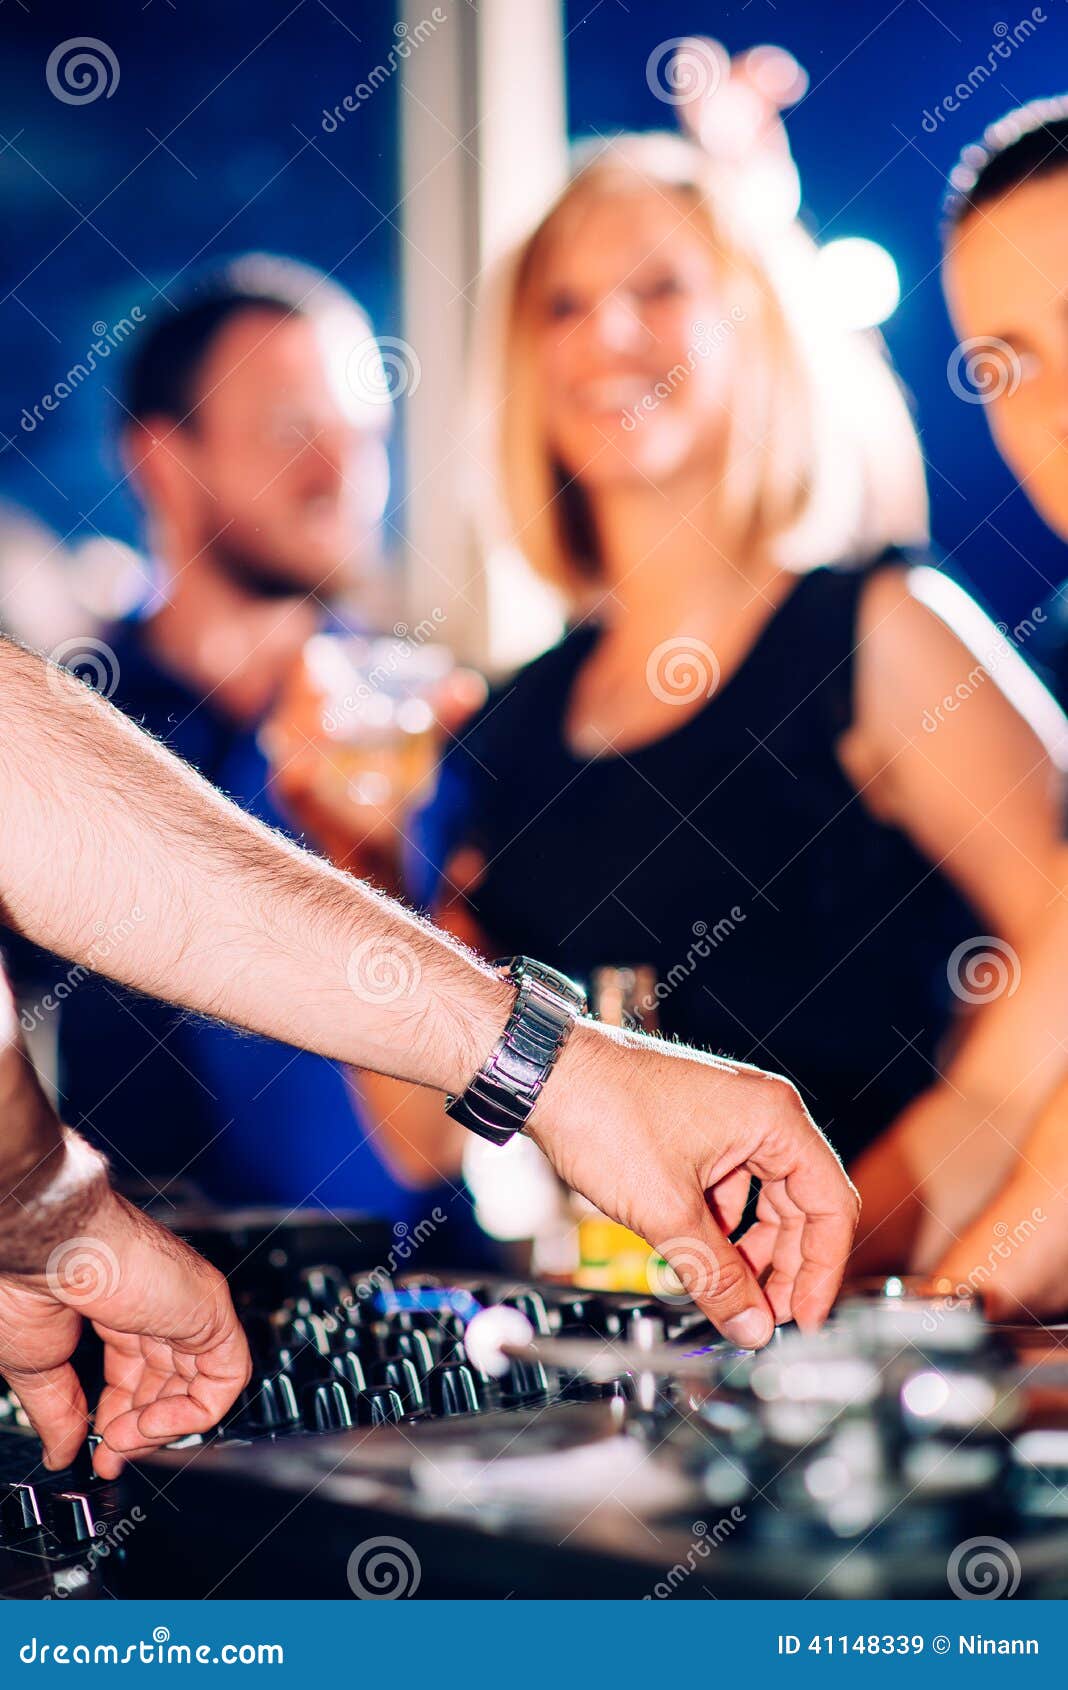 Party People in Front of Turntable Stock Image - Image of mixer ...